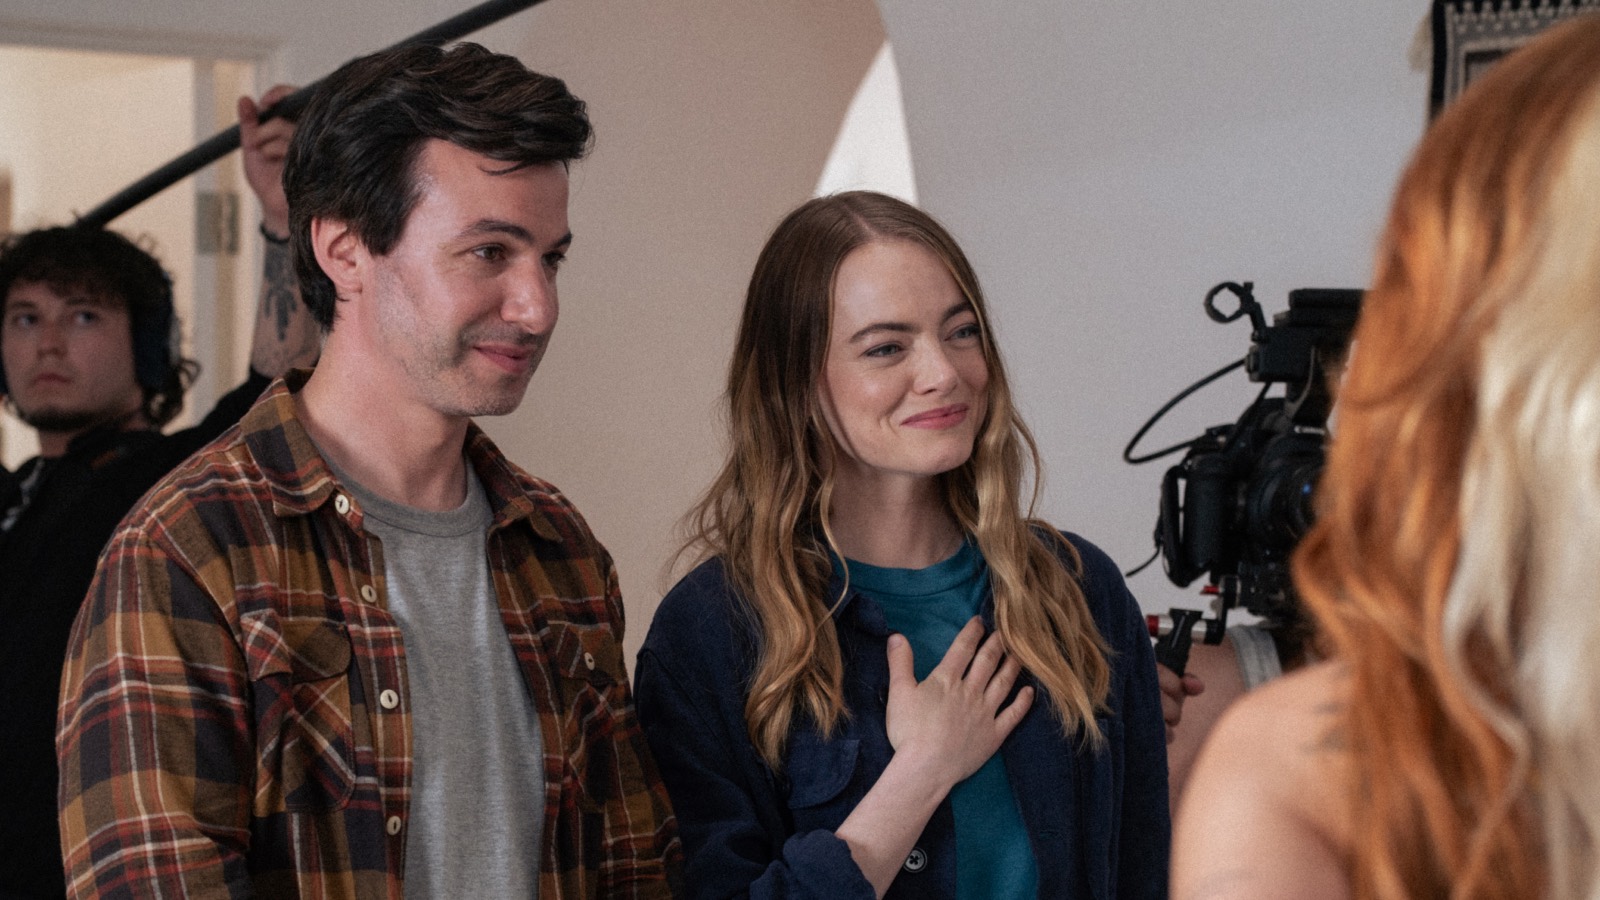 Nathan Fielder stands next to Emma Stone, with cameras and booms surrounding them.